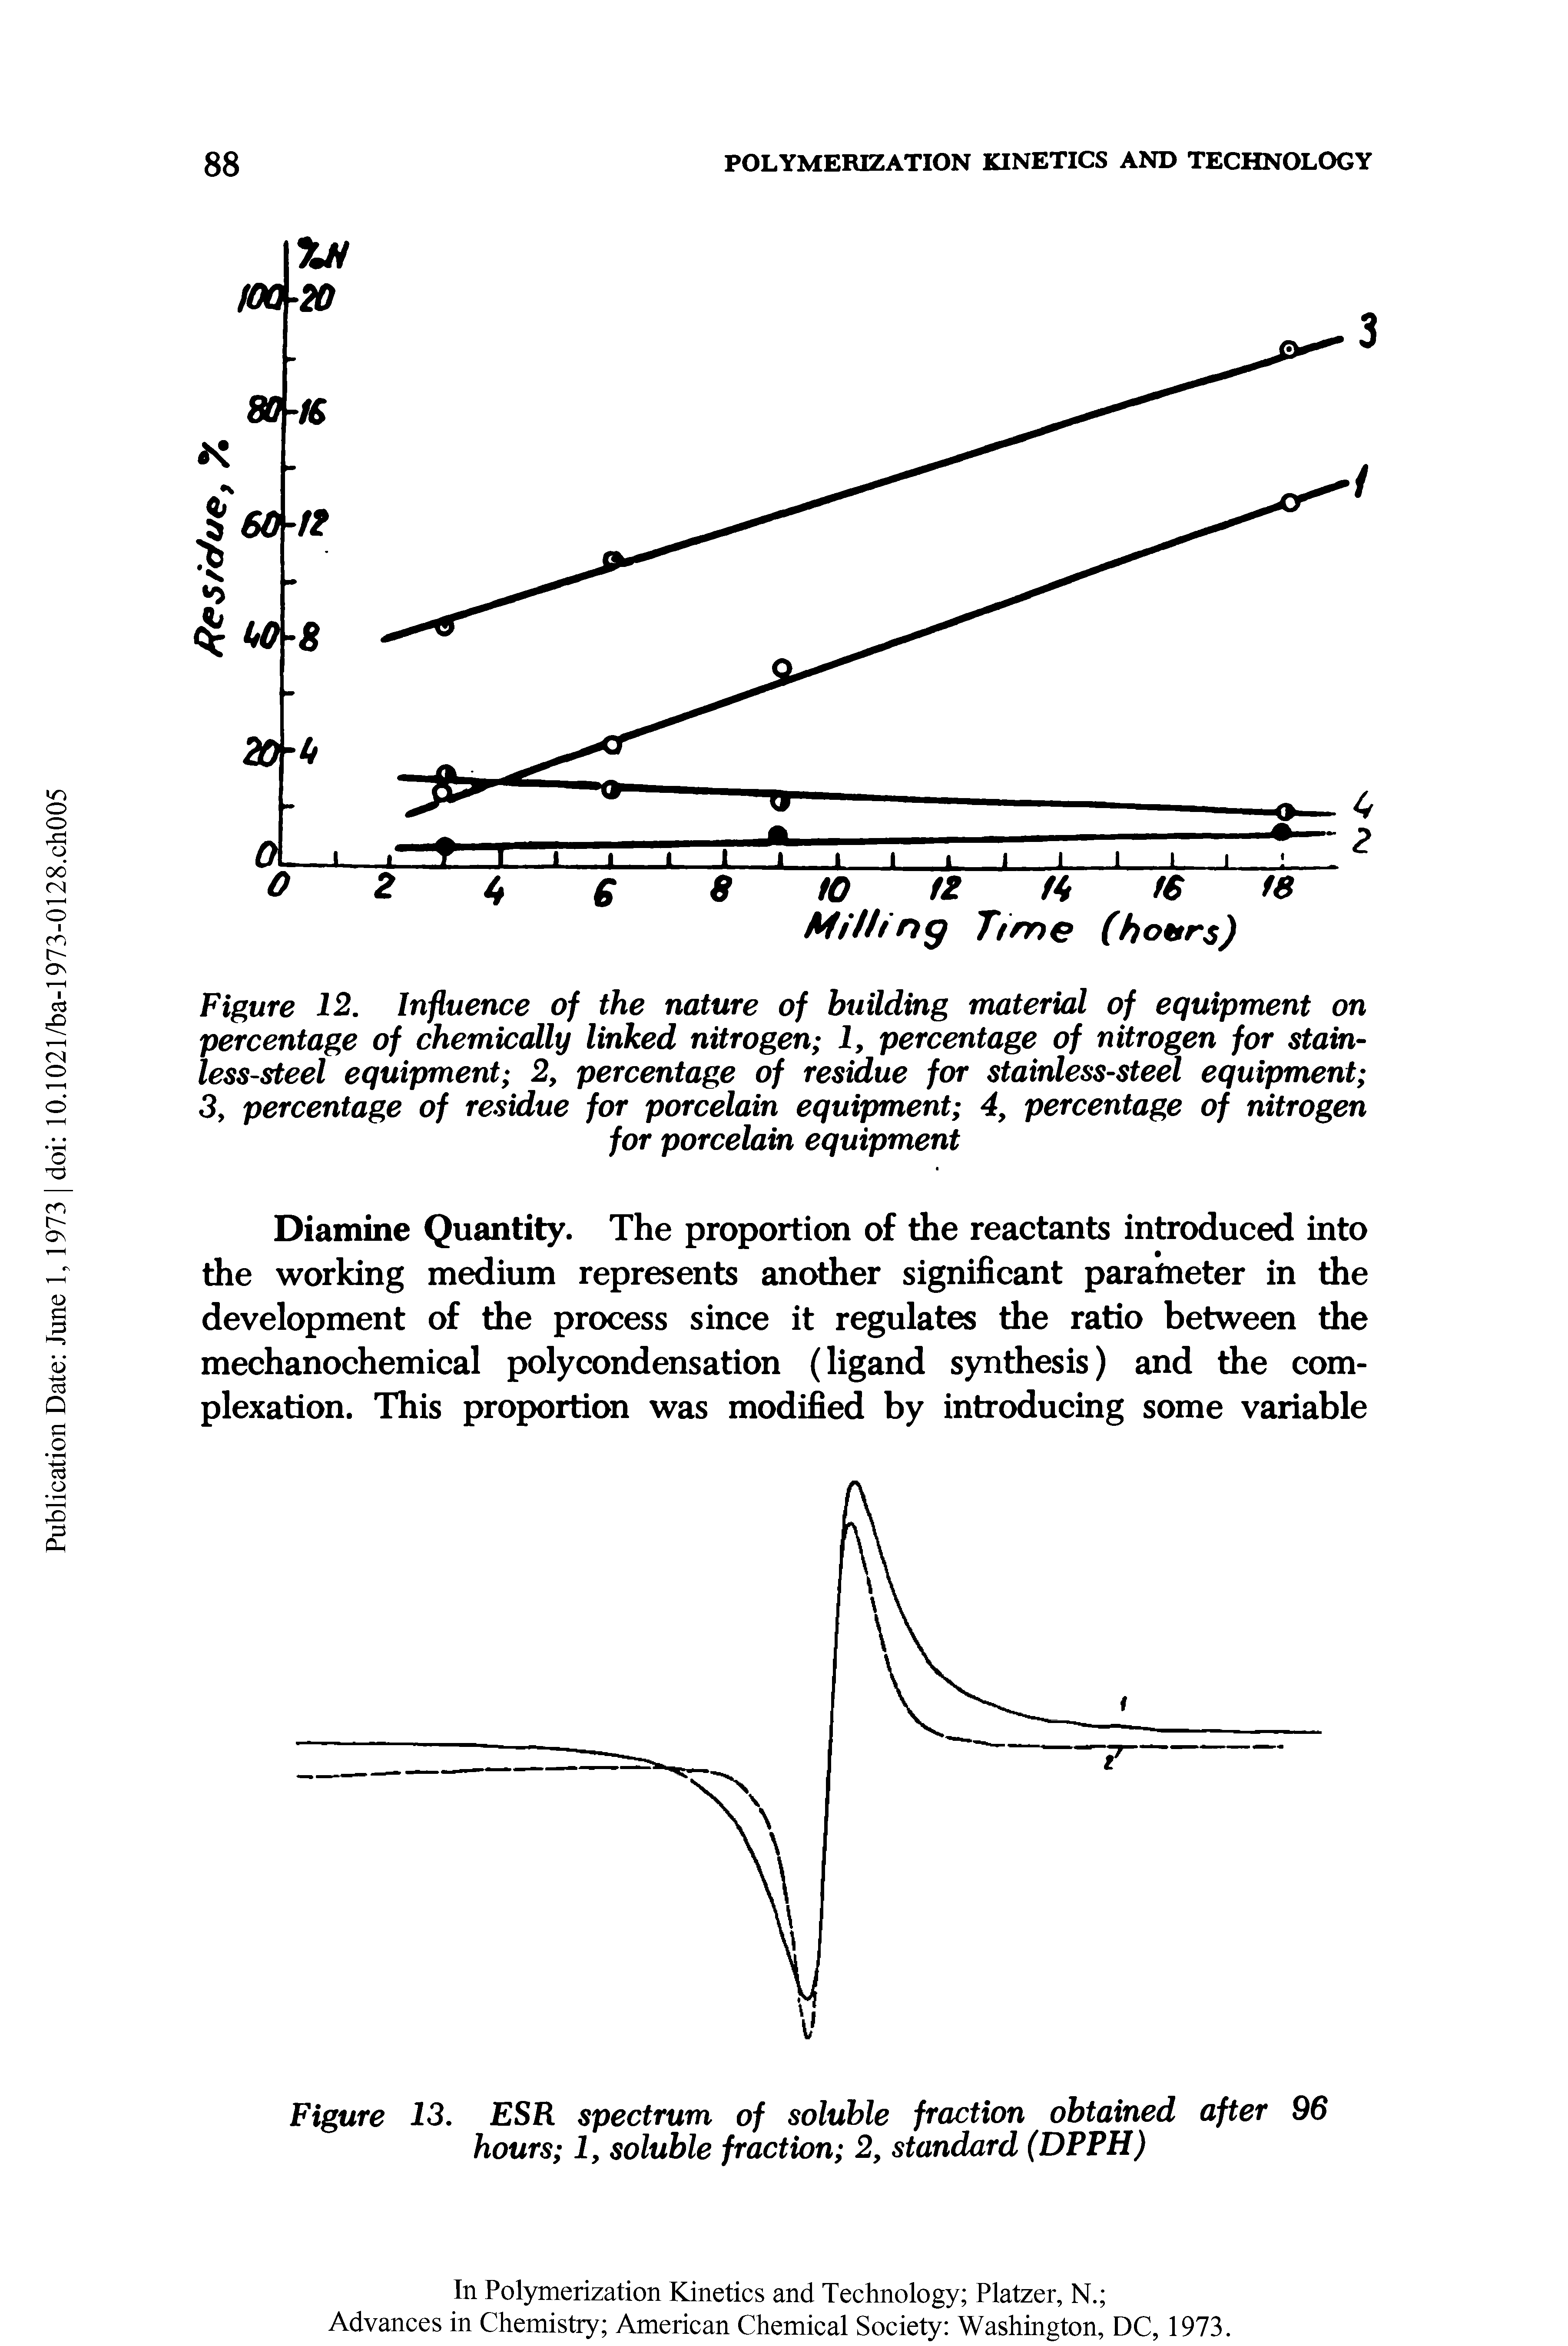 Figure 12. Influence of the nature of building material of equipment on percentage of chemically linked nitrogen 1, percentage of nitrogen for stainless-steel equipment 2, percentage of residue for stainless-steel equipment 3, percentage of residue for porcelain equipment 4, percentage of nitrogen...